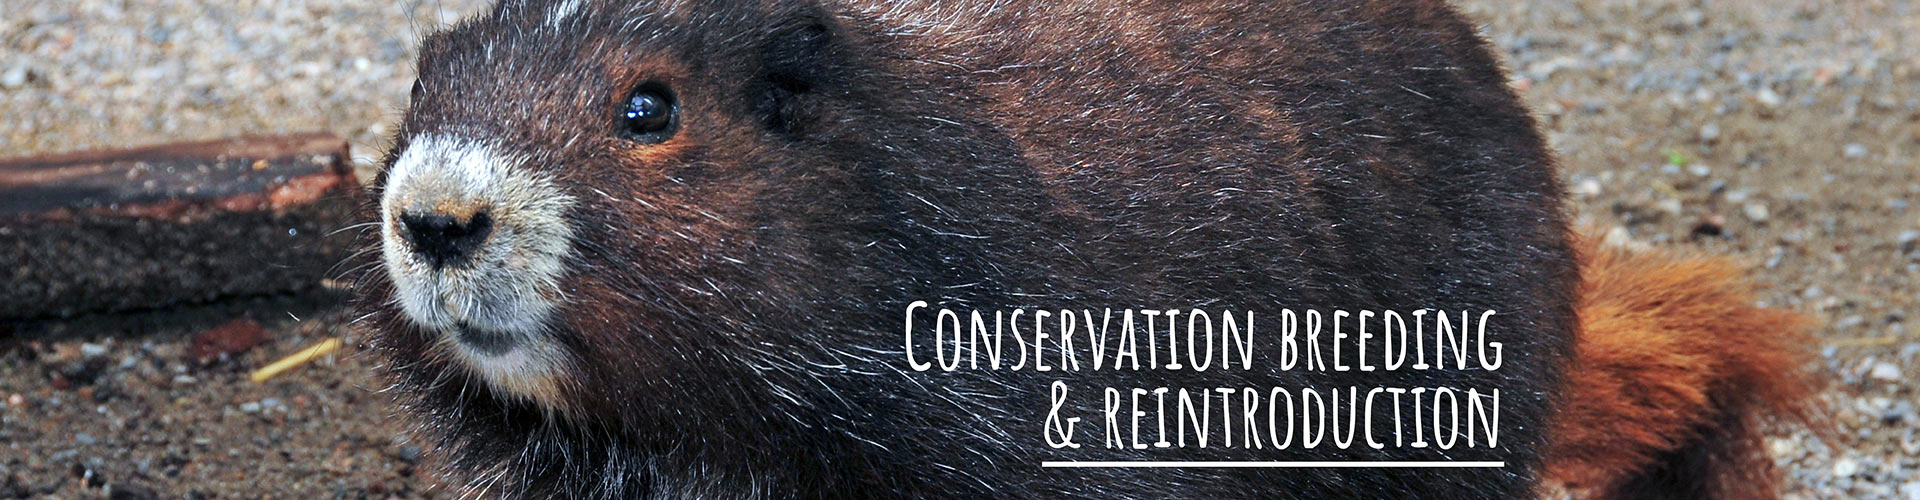 Conservation Breeding and Reintroduction - WT